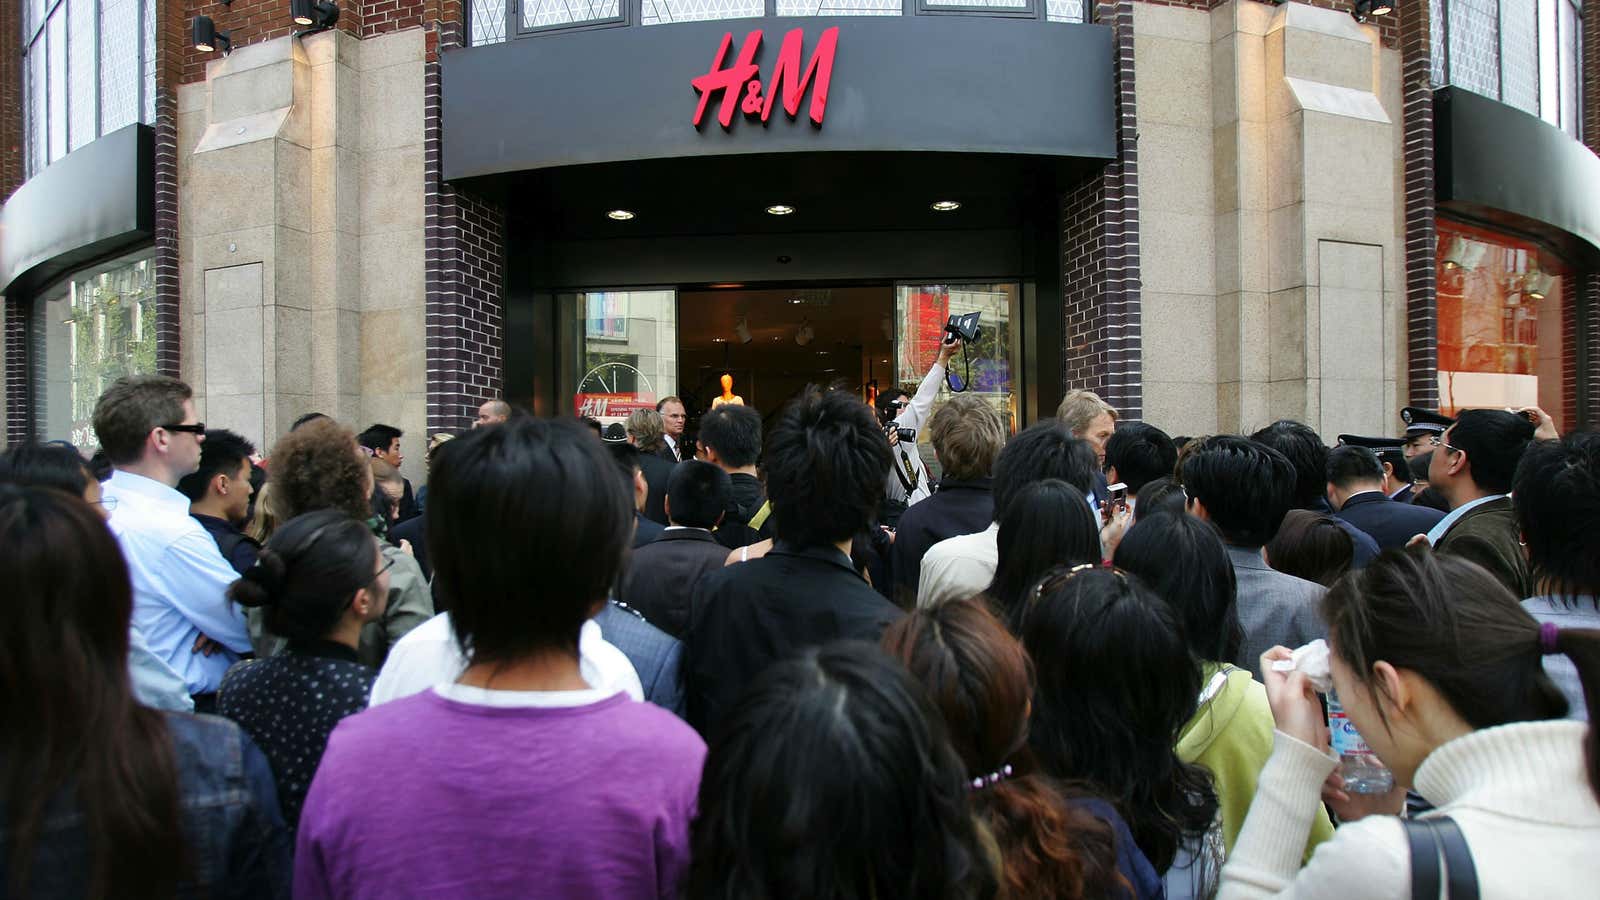 There’s a sea of waiting shoppers in China.